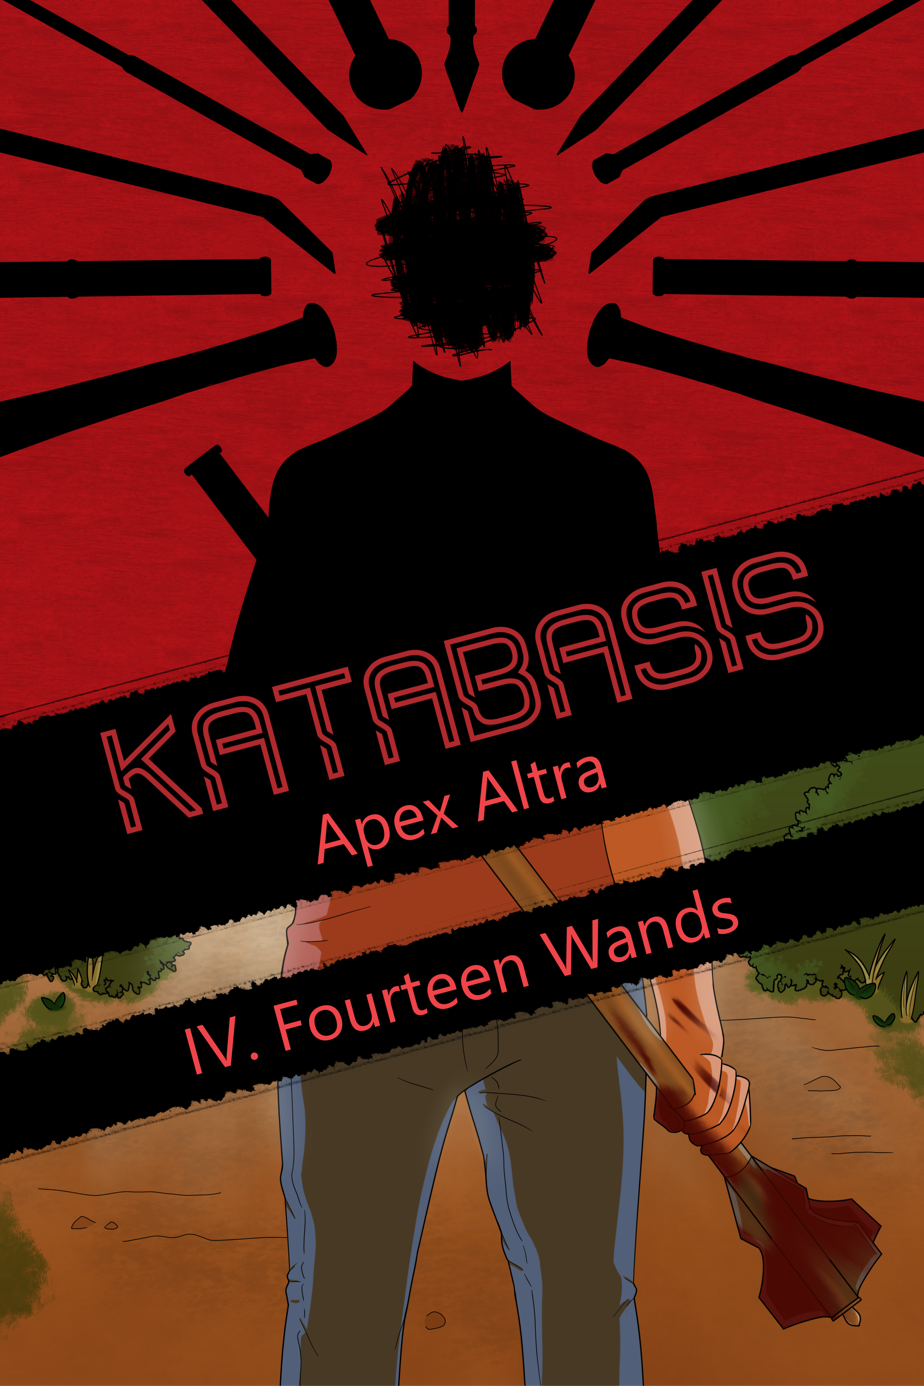 Image: The cover for Katabasis chapter 4. It’s diagonally cut into halves by two jagged black bars. The top half of the image is red and shows a black silhouette of a person from the shoulders-up. Their aspect is hidden by a scribble. Silhouettes of different blunt weapons arc over their head in a halo-like fashion. The bottom half of the image shows the rest of the figure in full color, standing on a dirt path flanked by bushes. They have light skin, a feminine figure, and are wearing a pink t-shirt and jeans. In their hands is a mace spattered with blood. Sunlight illuminates them from behind. Text on the black bars reads “Katabasis, Apex Altra, 4: Fourteen Wands.” End description.